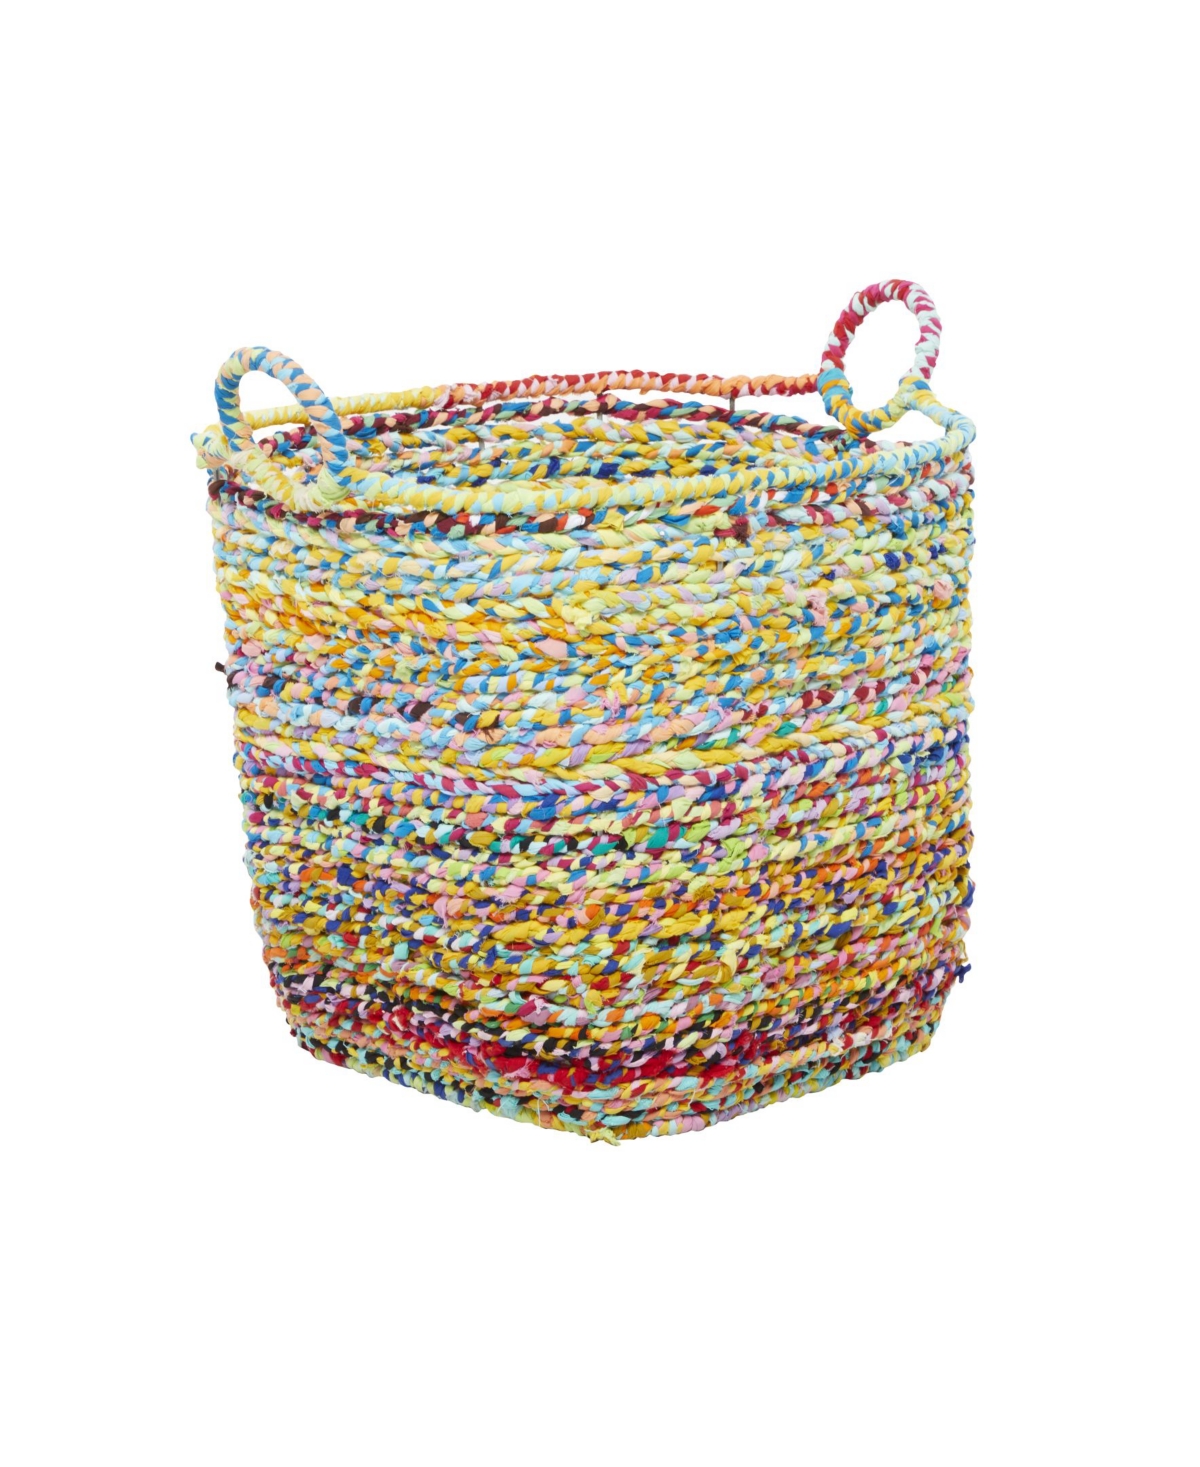 Rosemary Lane Eclectic Storage Basket, 23" X 18" In Multi